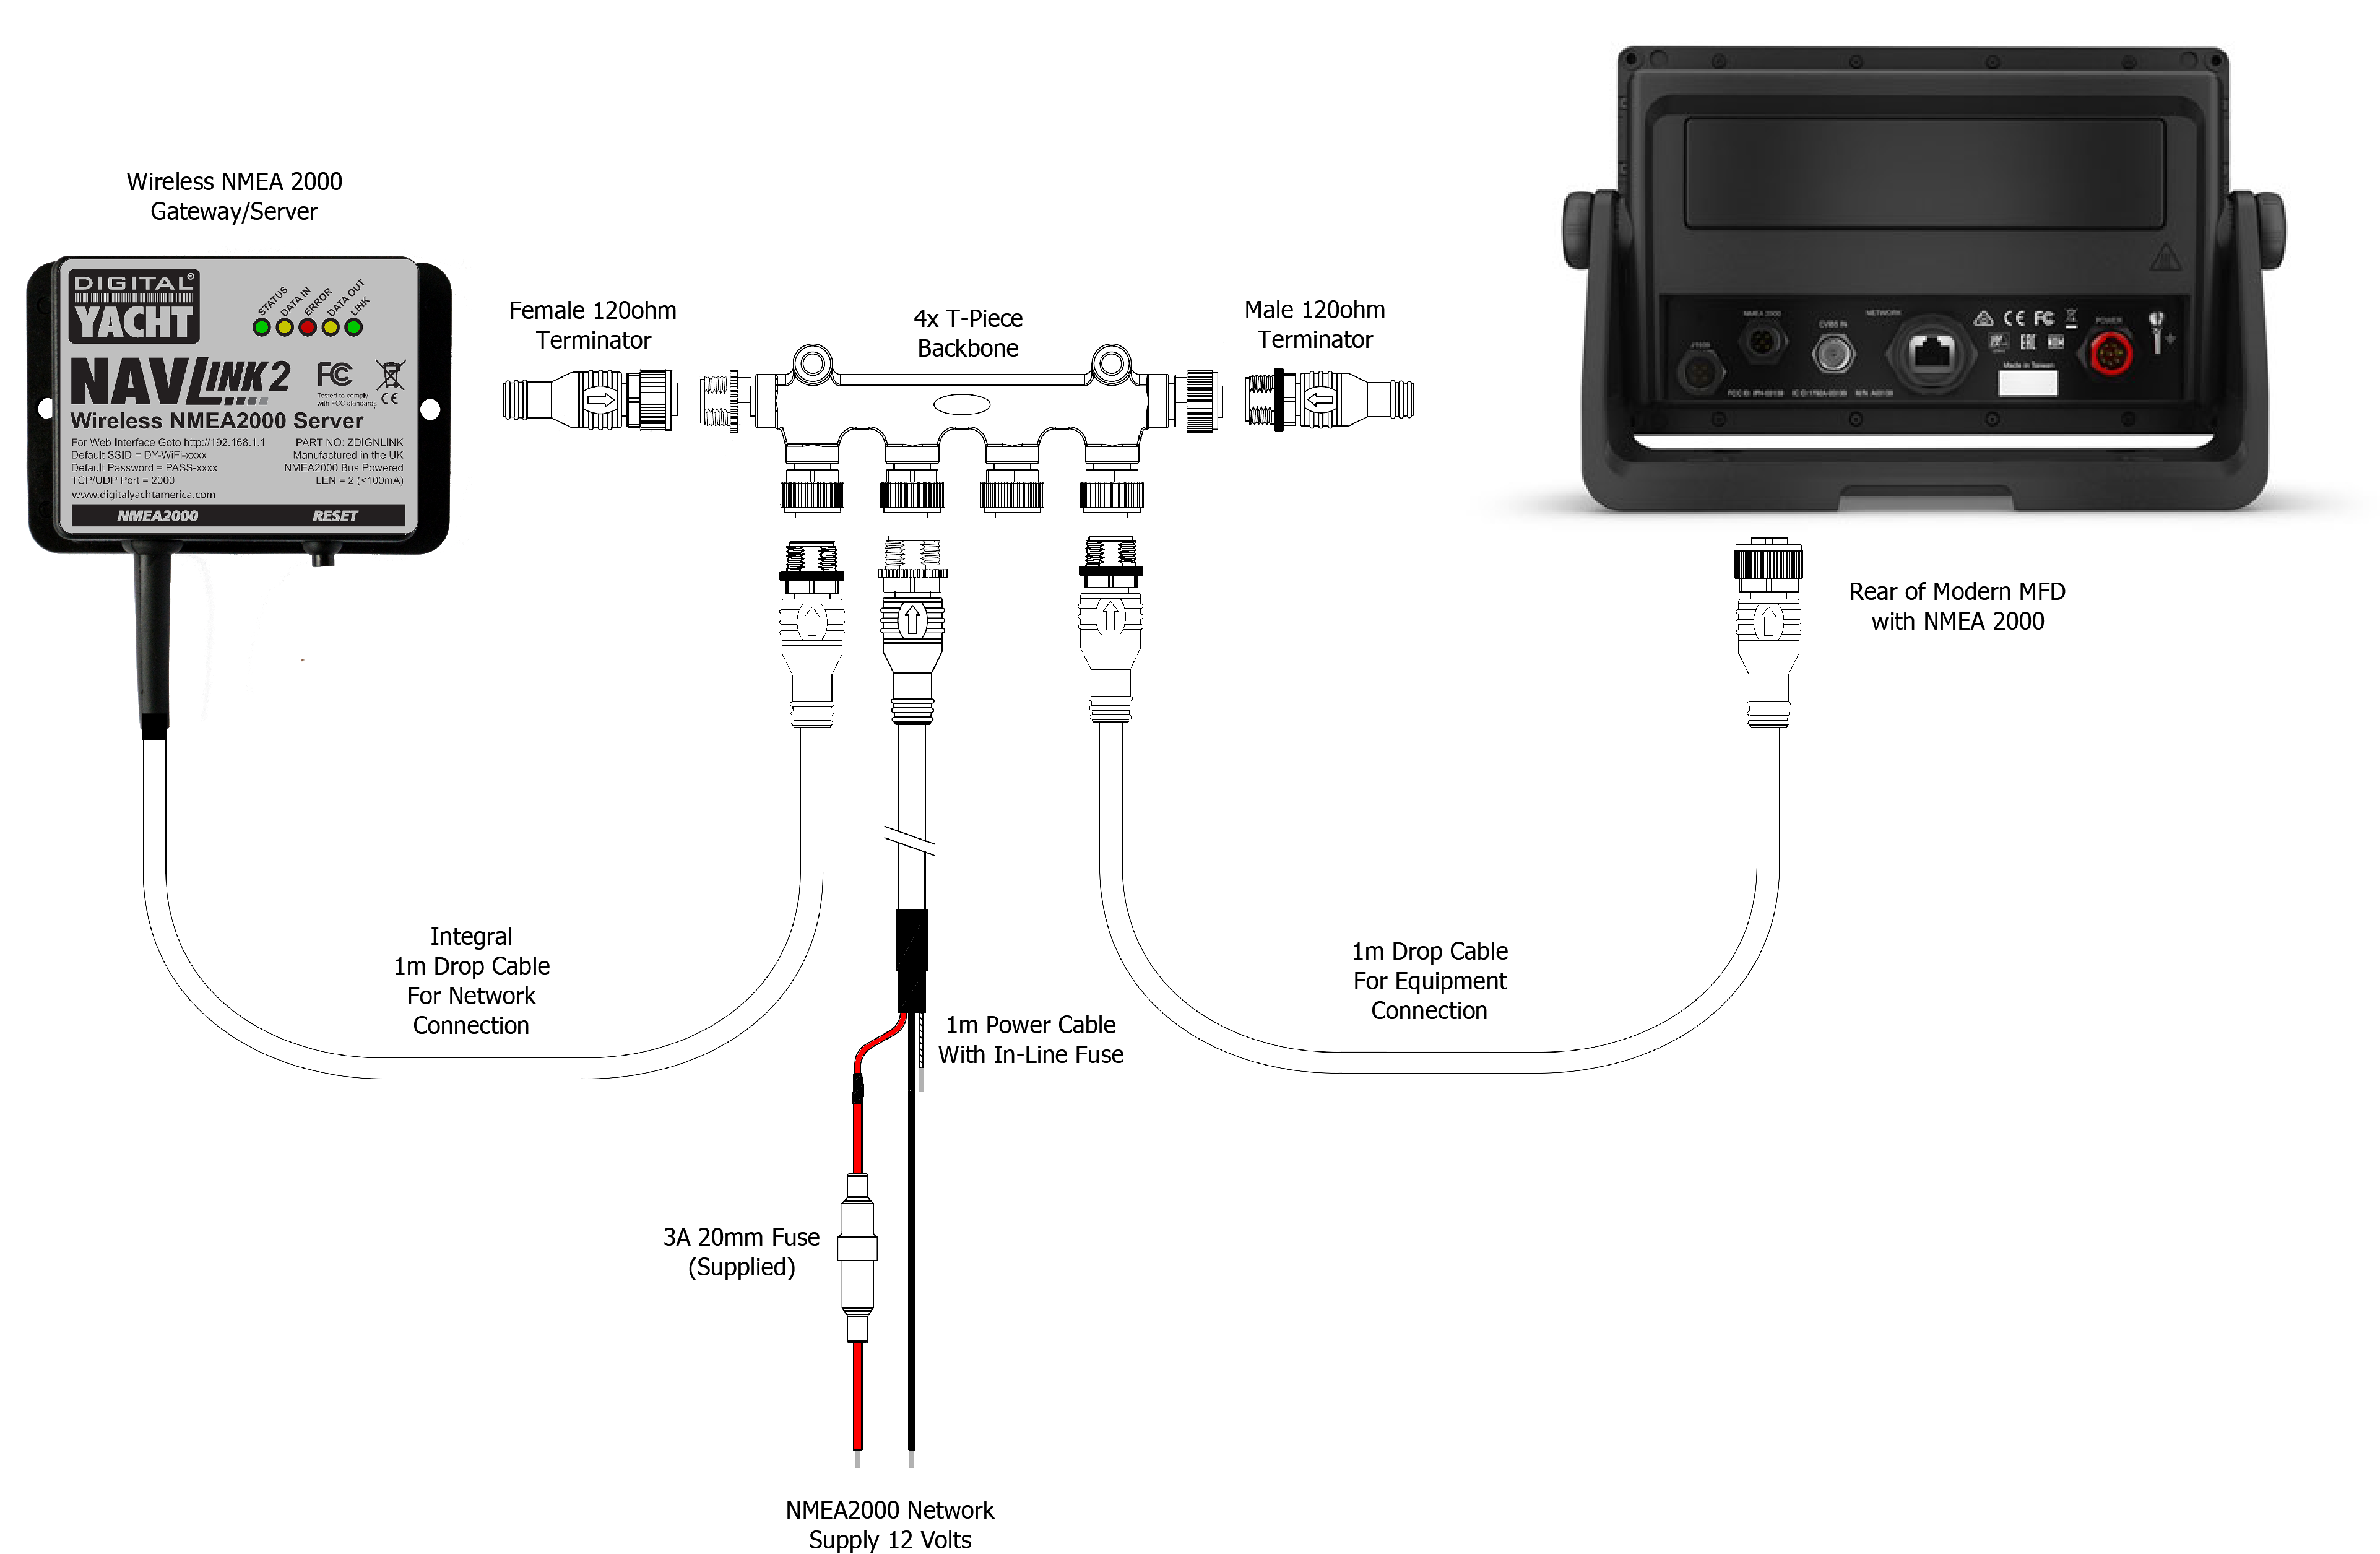 Connecting a Navlink2 to a Digital Yacht NMEA 2000 Starter kit